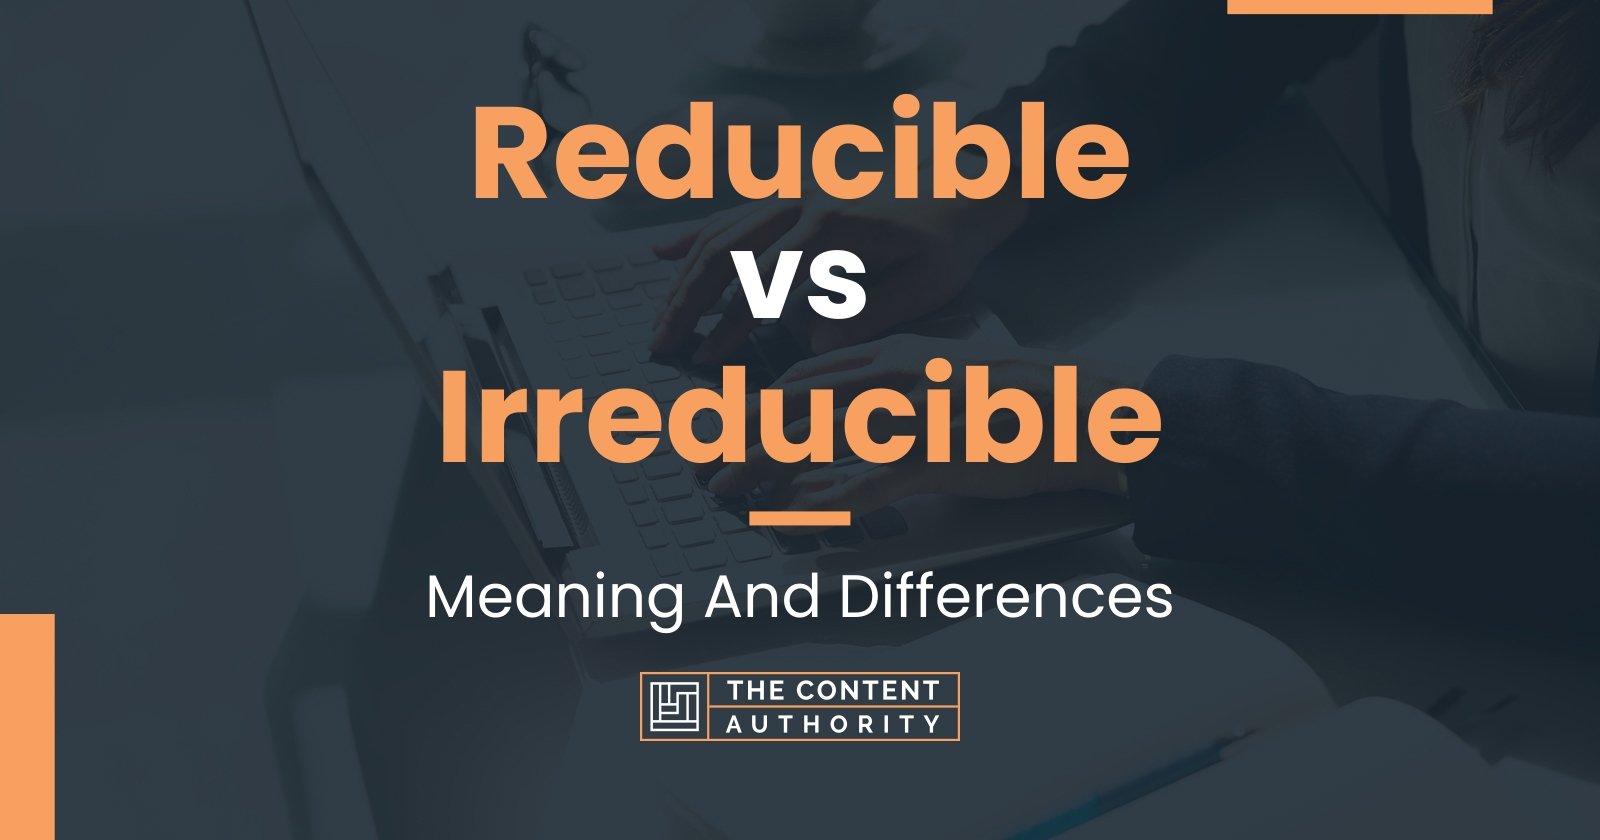 Reducible vs Irreducible: Meaning And Differences